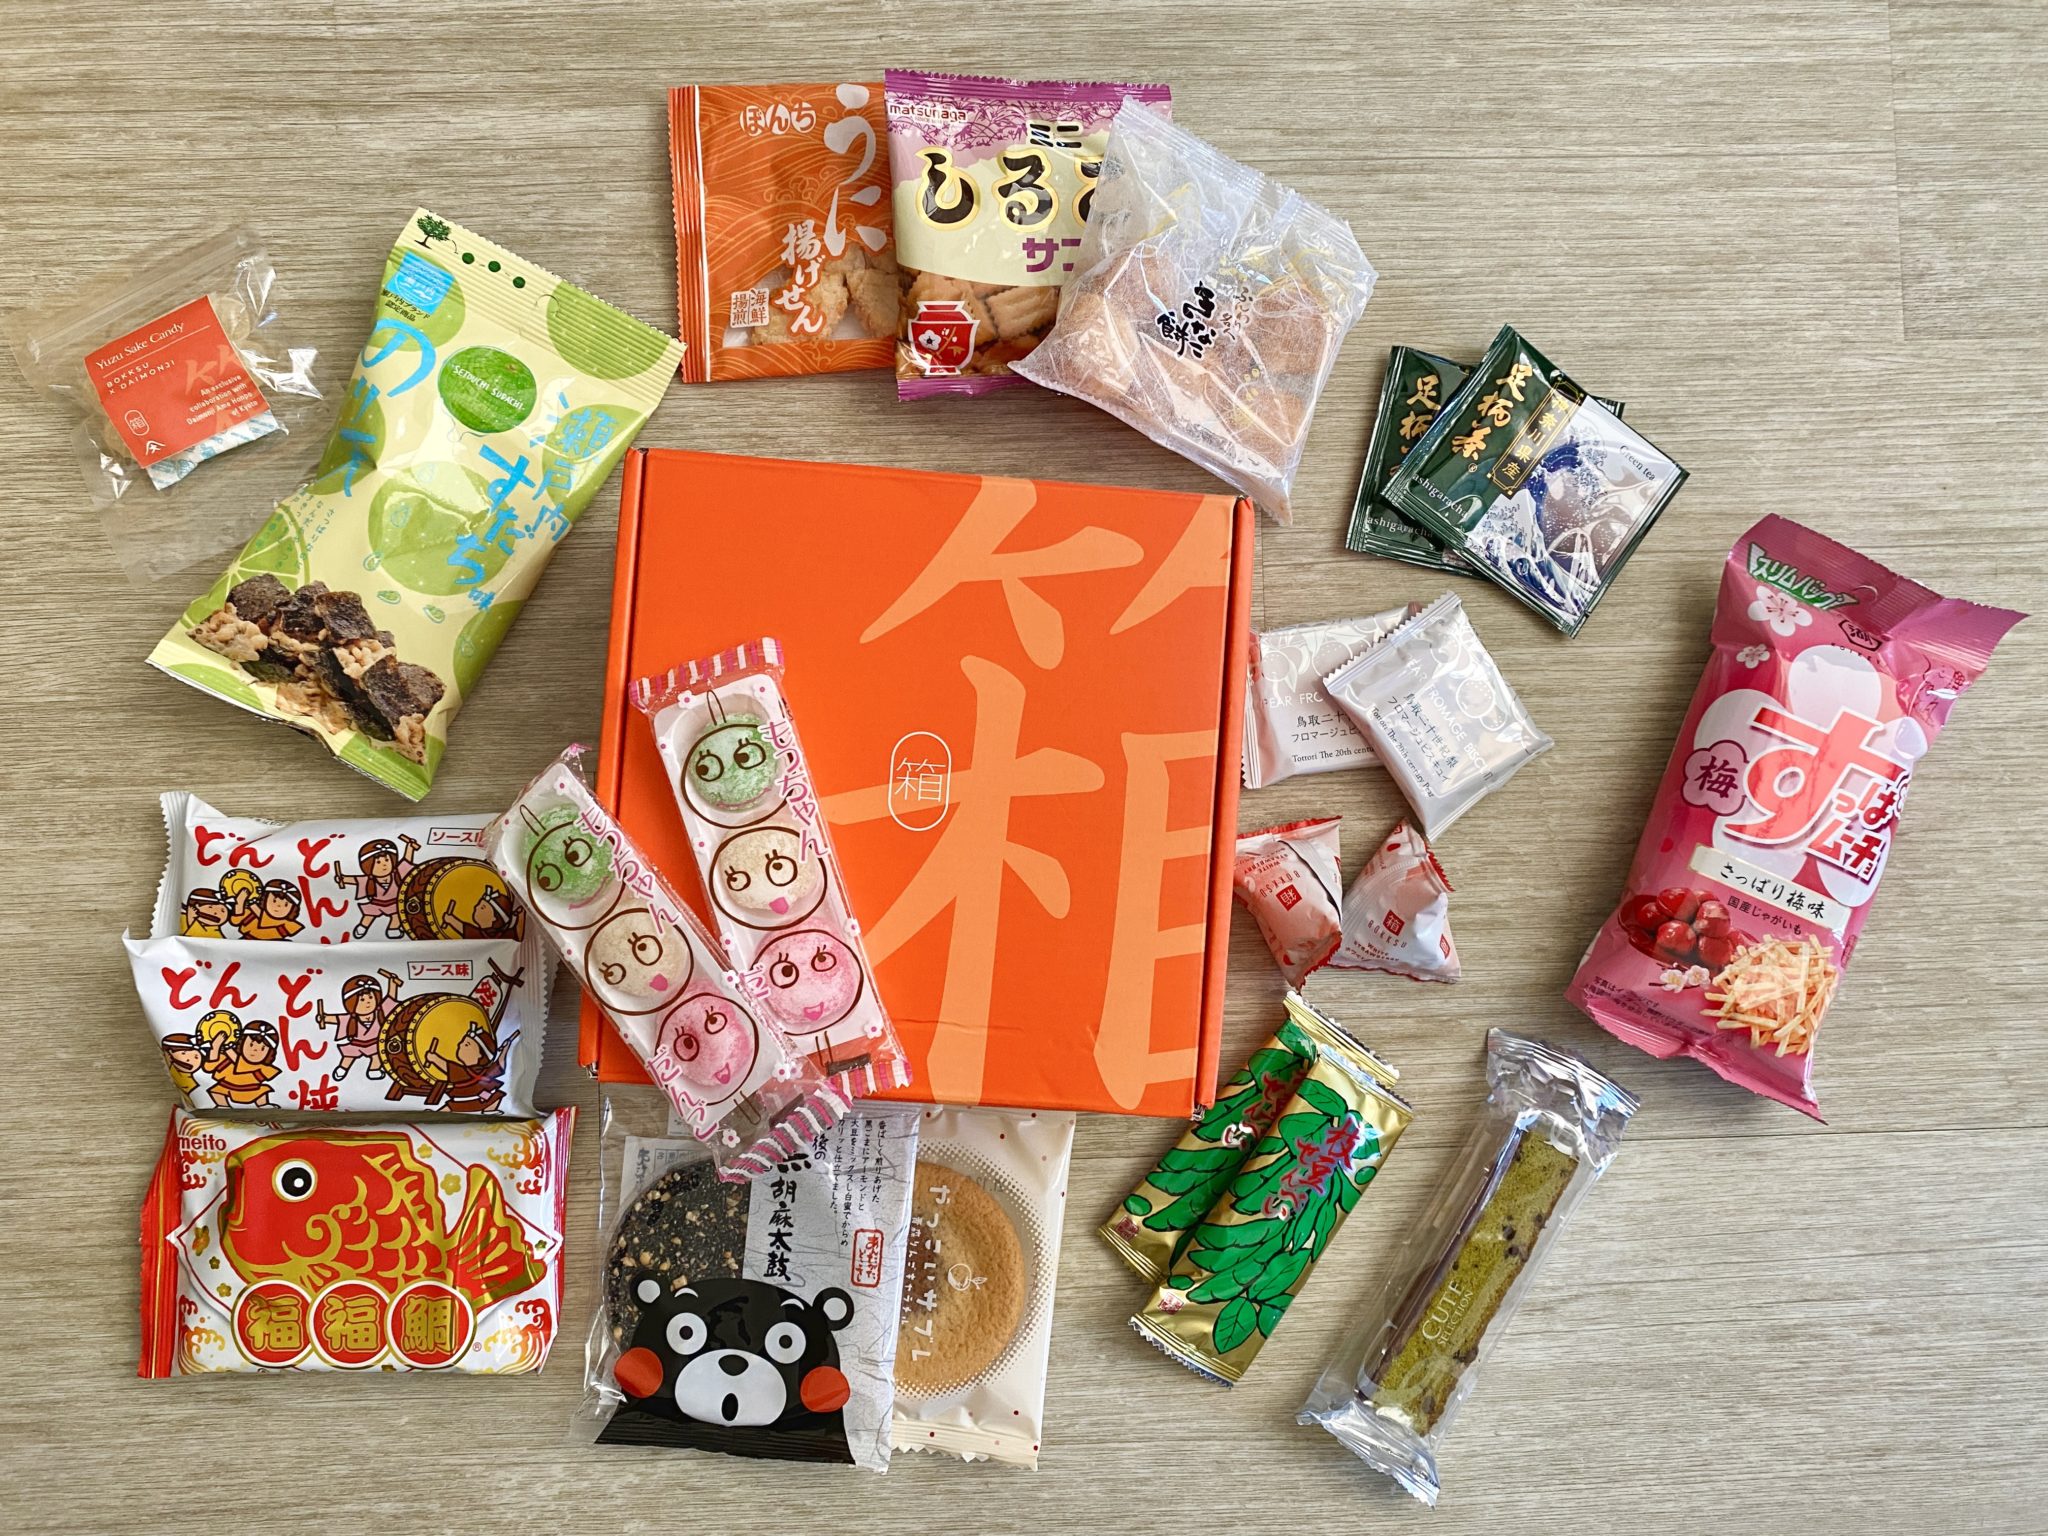 Bokksu Review Is It Worth The Money? Subscription Box Expert